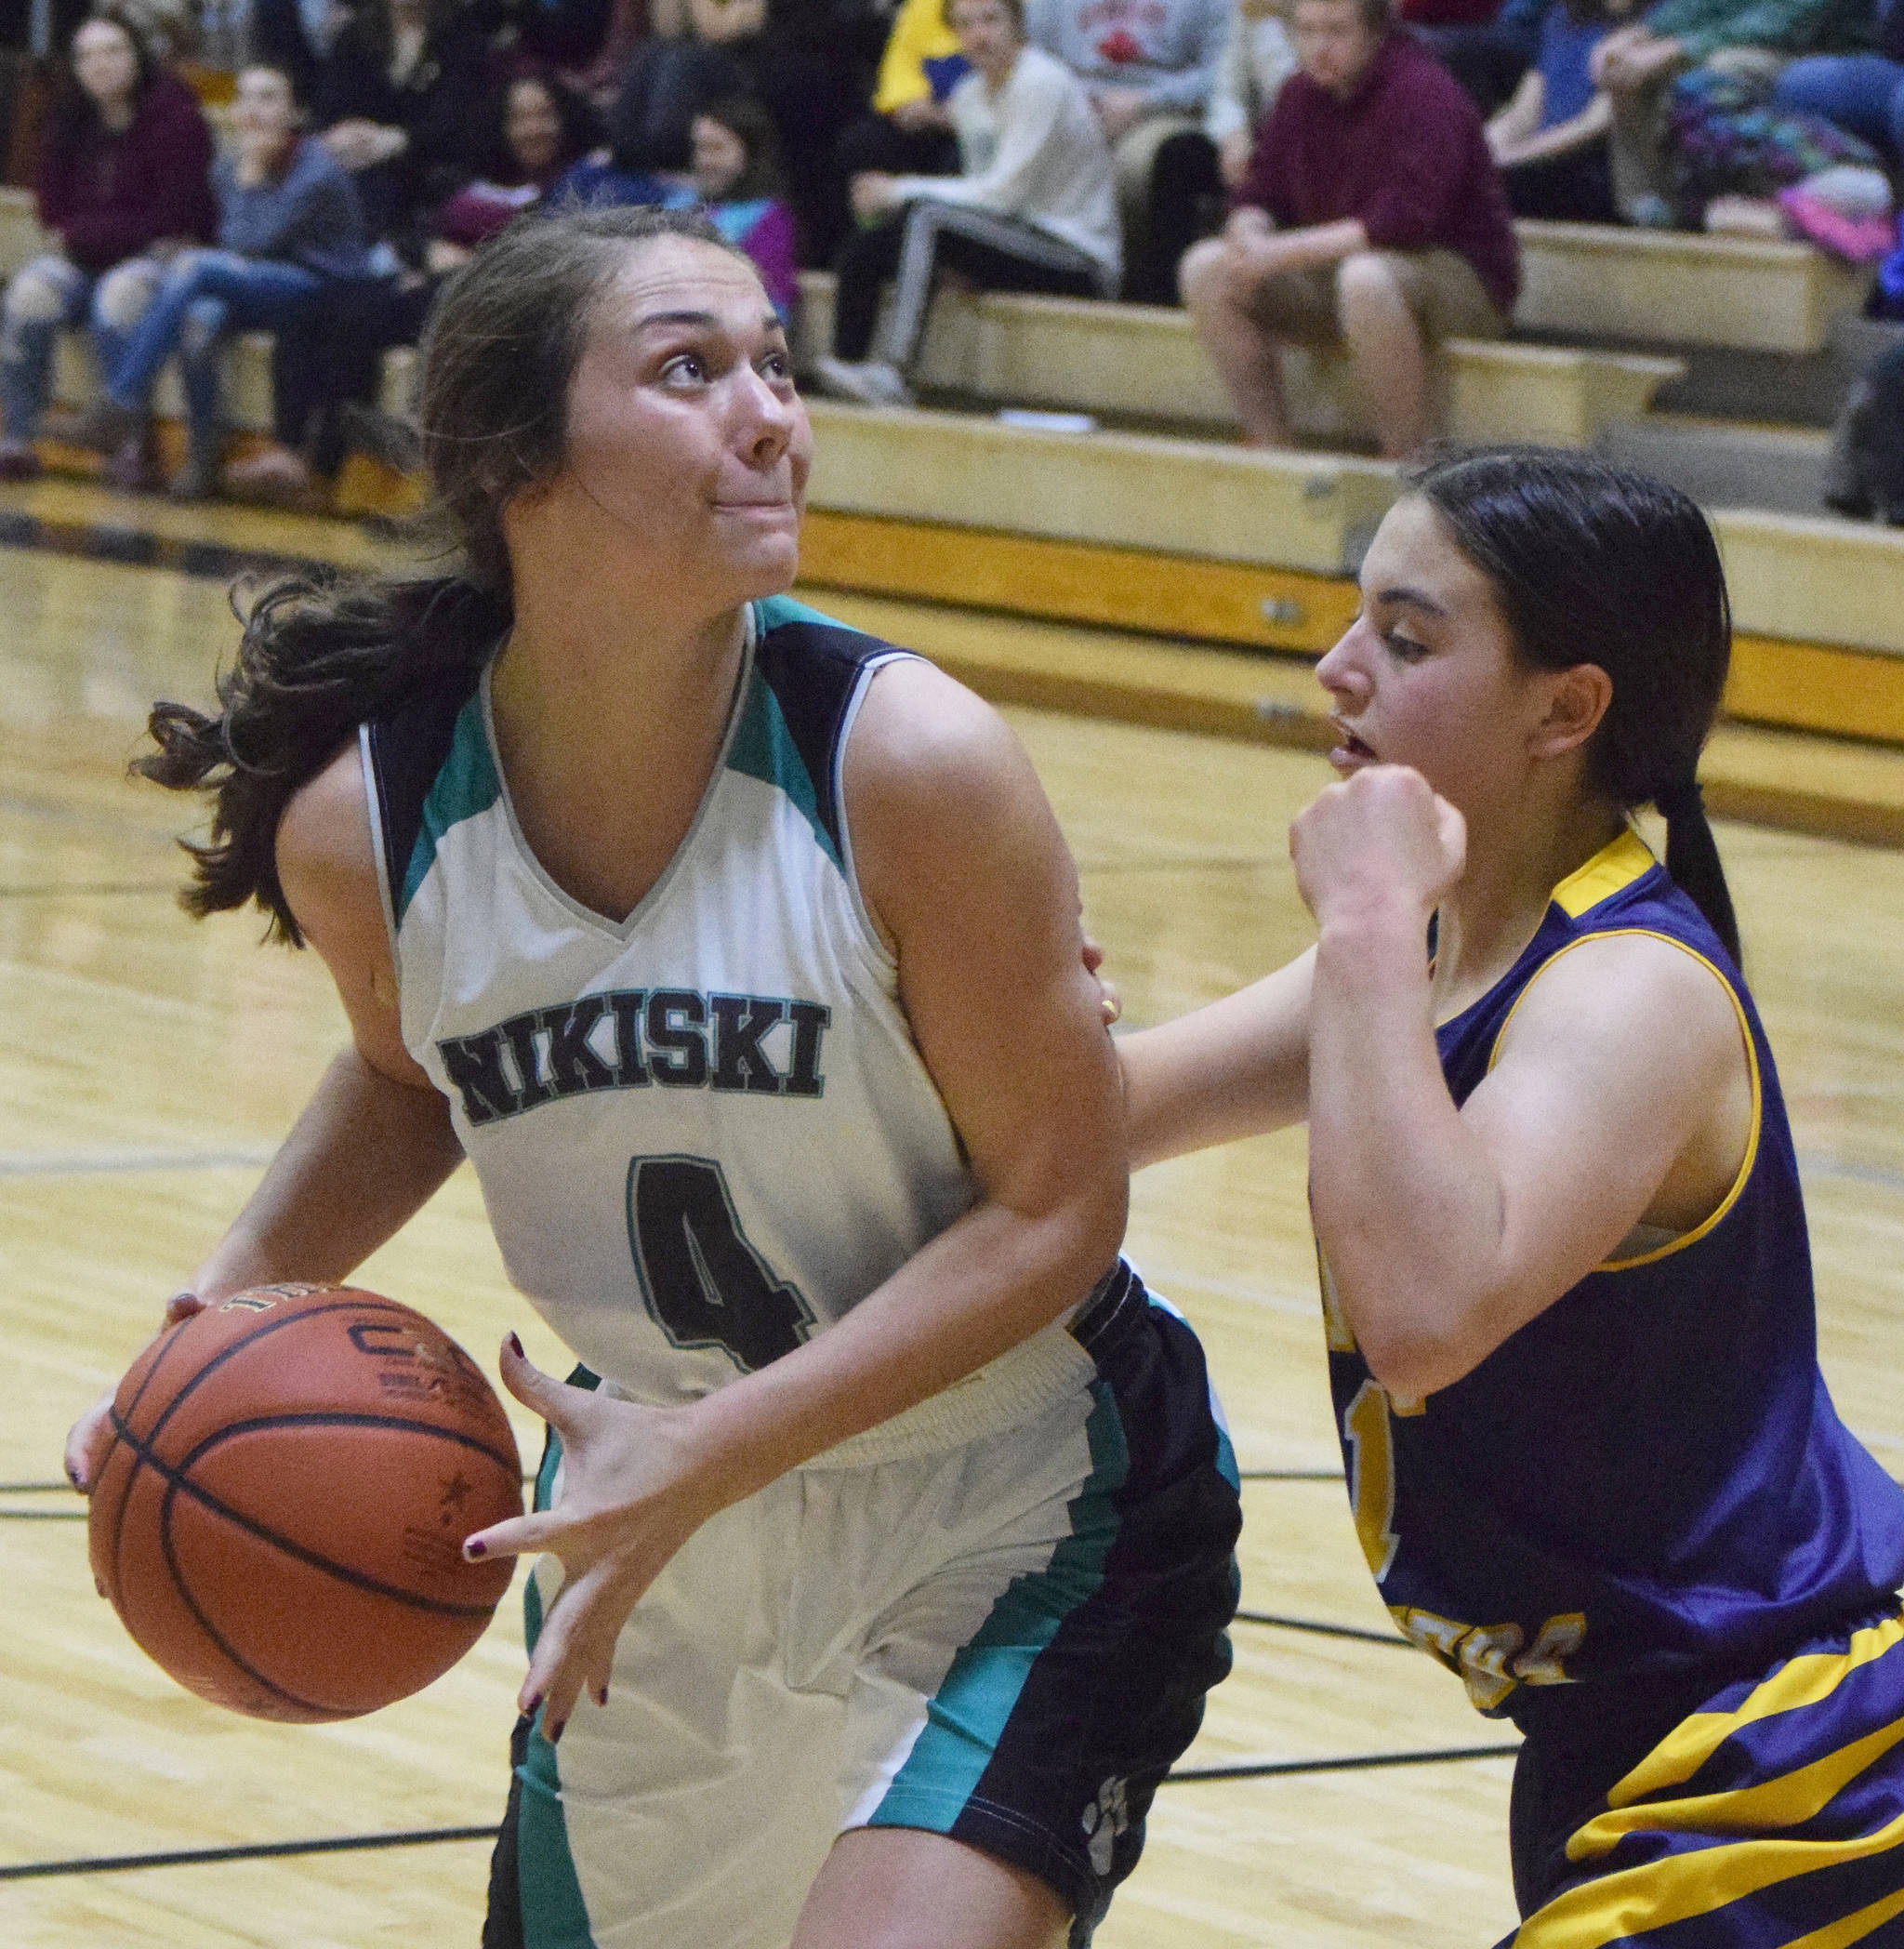 Nikiski senior Emma Wik (left) eyes the rim with Homer defender Sailey Rhodes guarding her Friday night in a Southcentral Conference clash at Nikiski High School. (Photo by Joey Klecka/Peninsula Clarion)